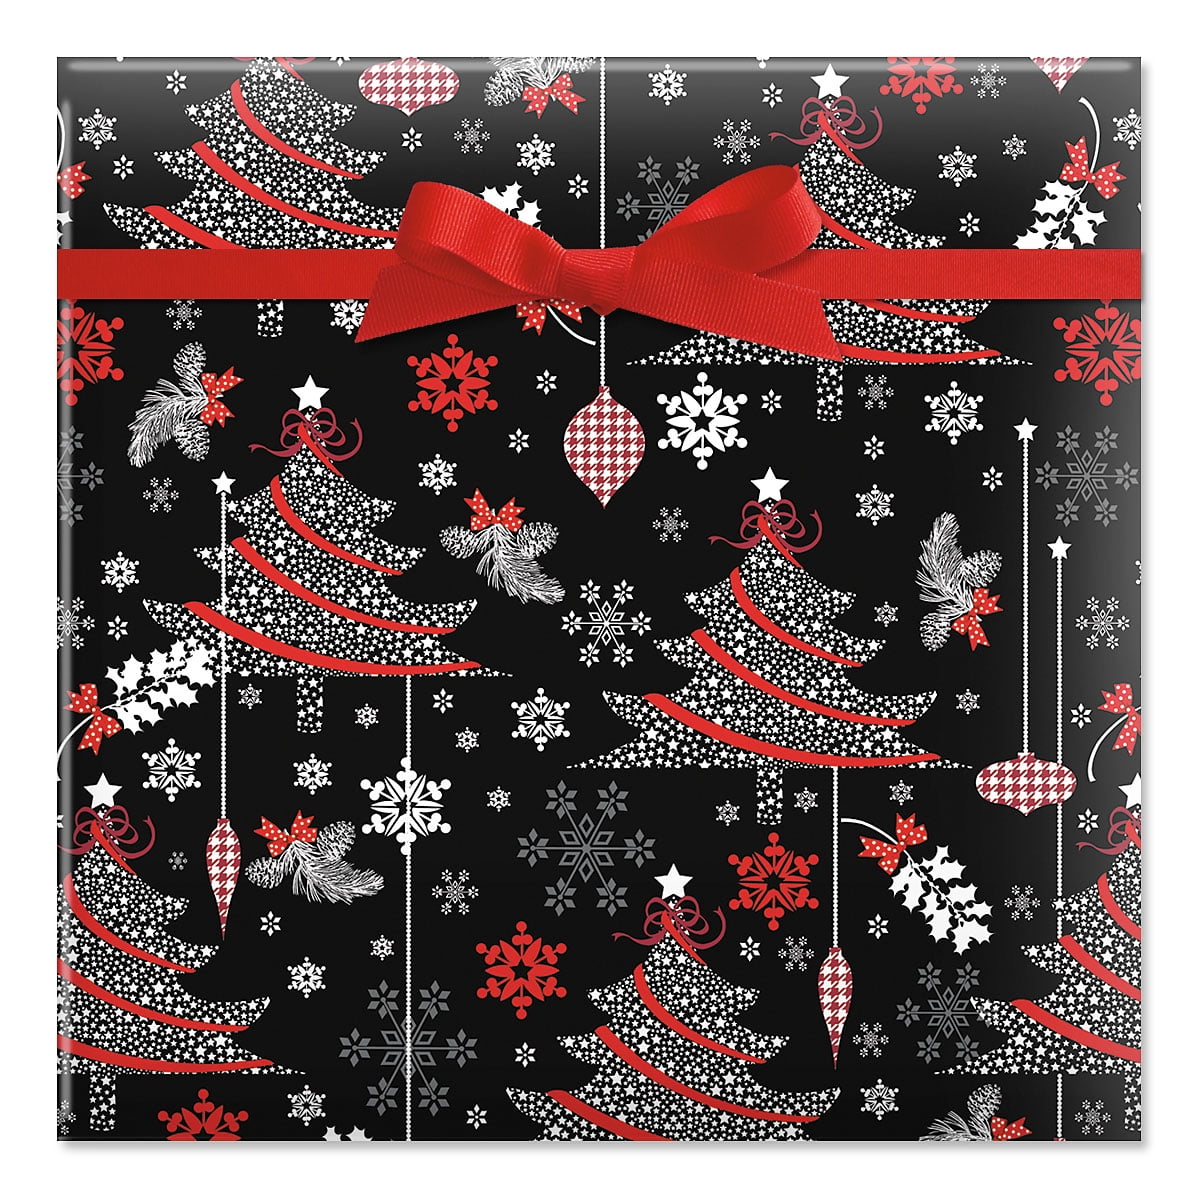 Current Multi-color Decked Out Decor Jumbo Rolled Christmas